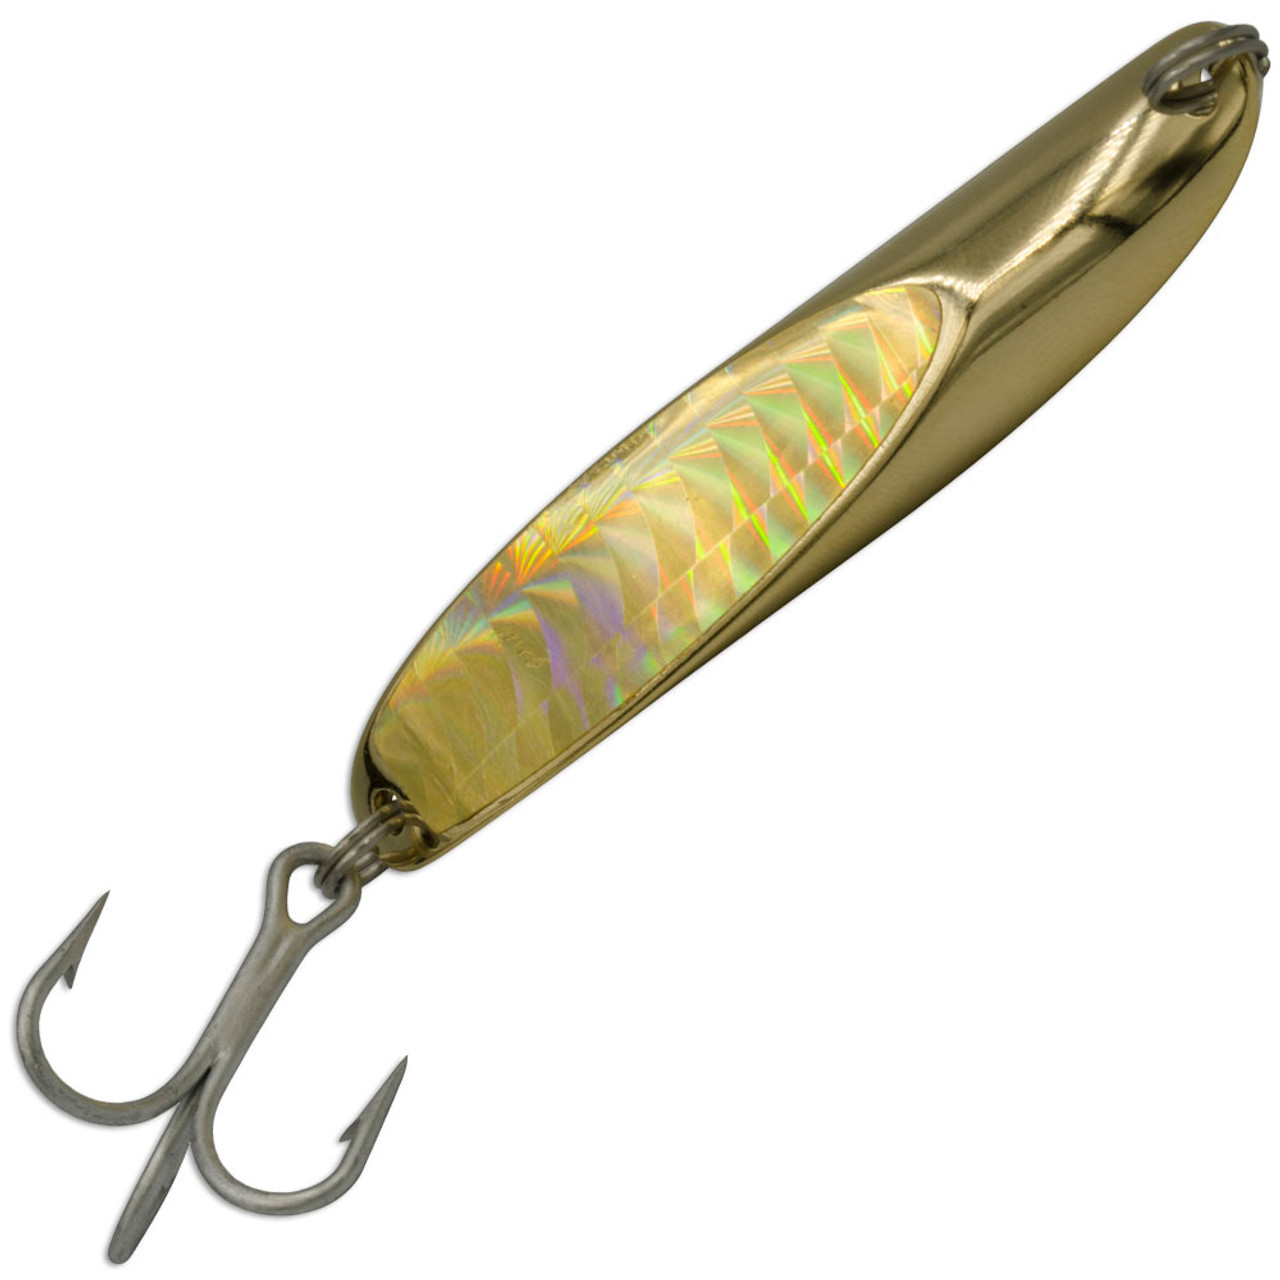 Halco Twisty Fishing Lures Gold or Chrome